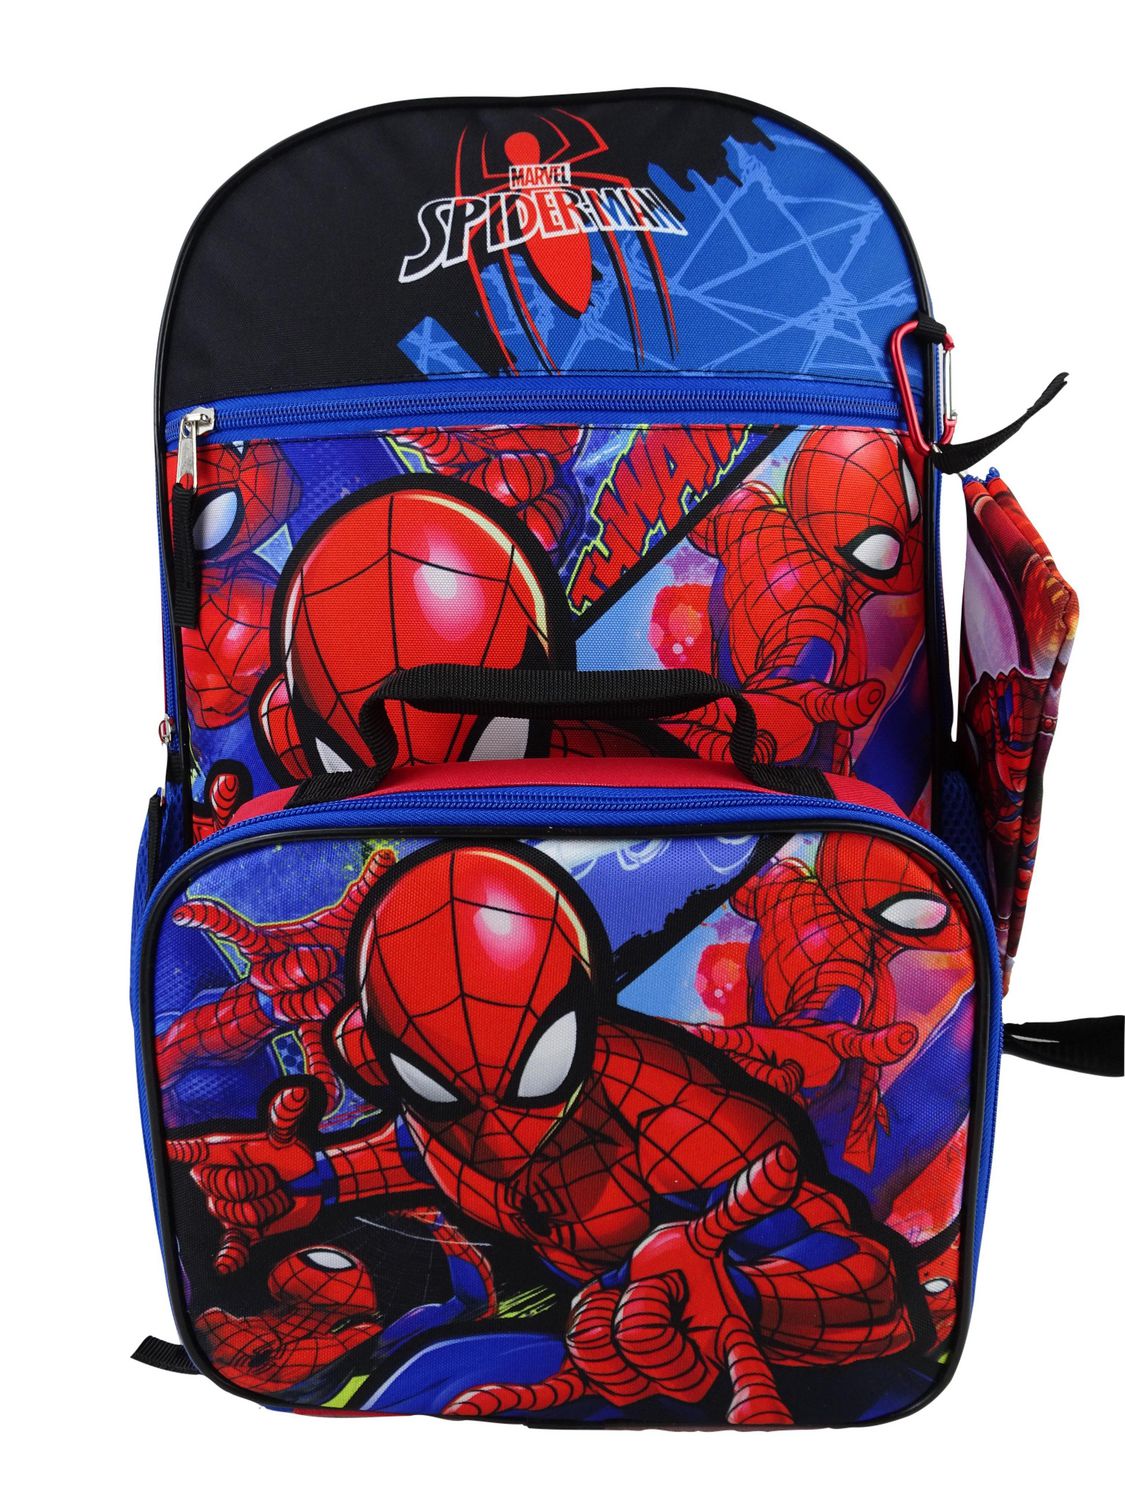 Disney Store Marvel Avengers Backpack & Lunch Tote Box Spiderman 2pc set NEW 